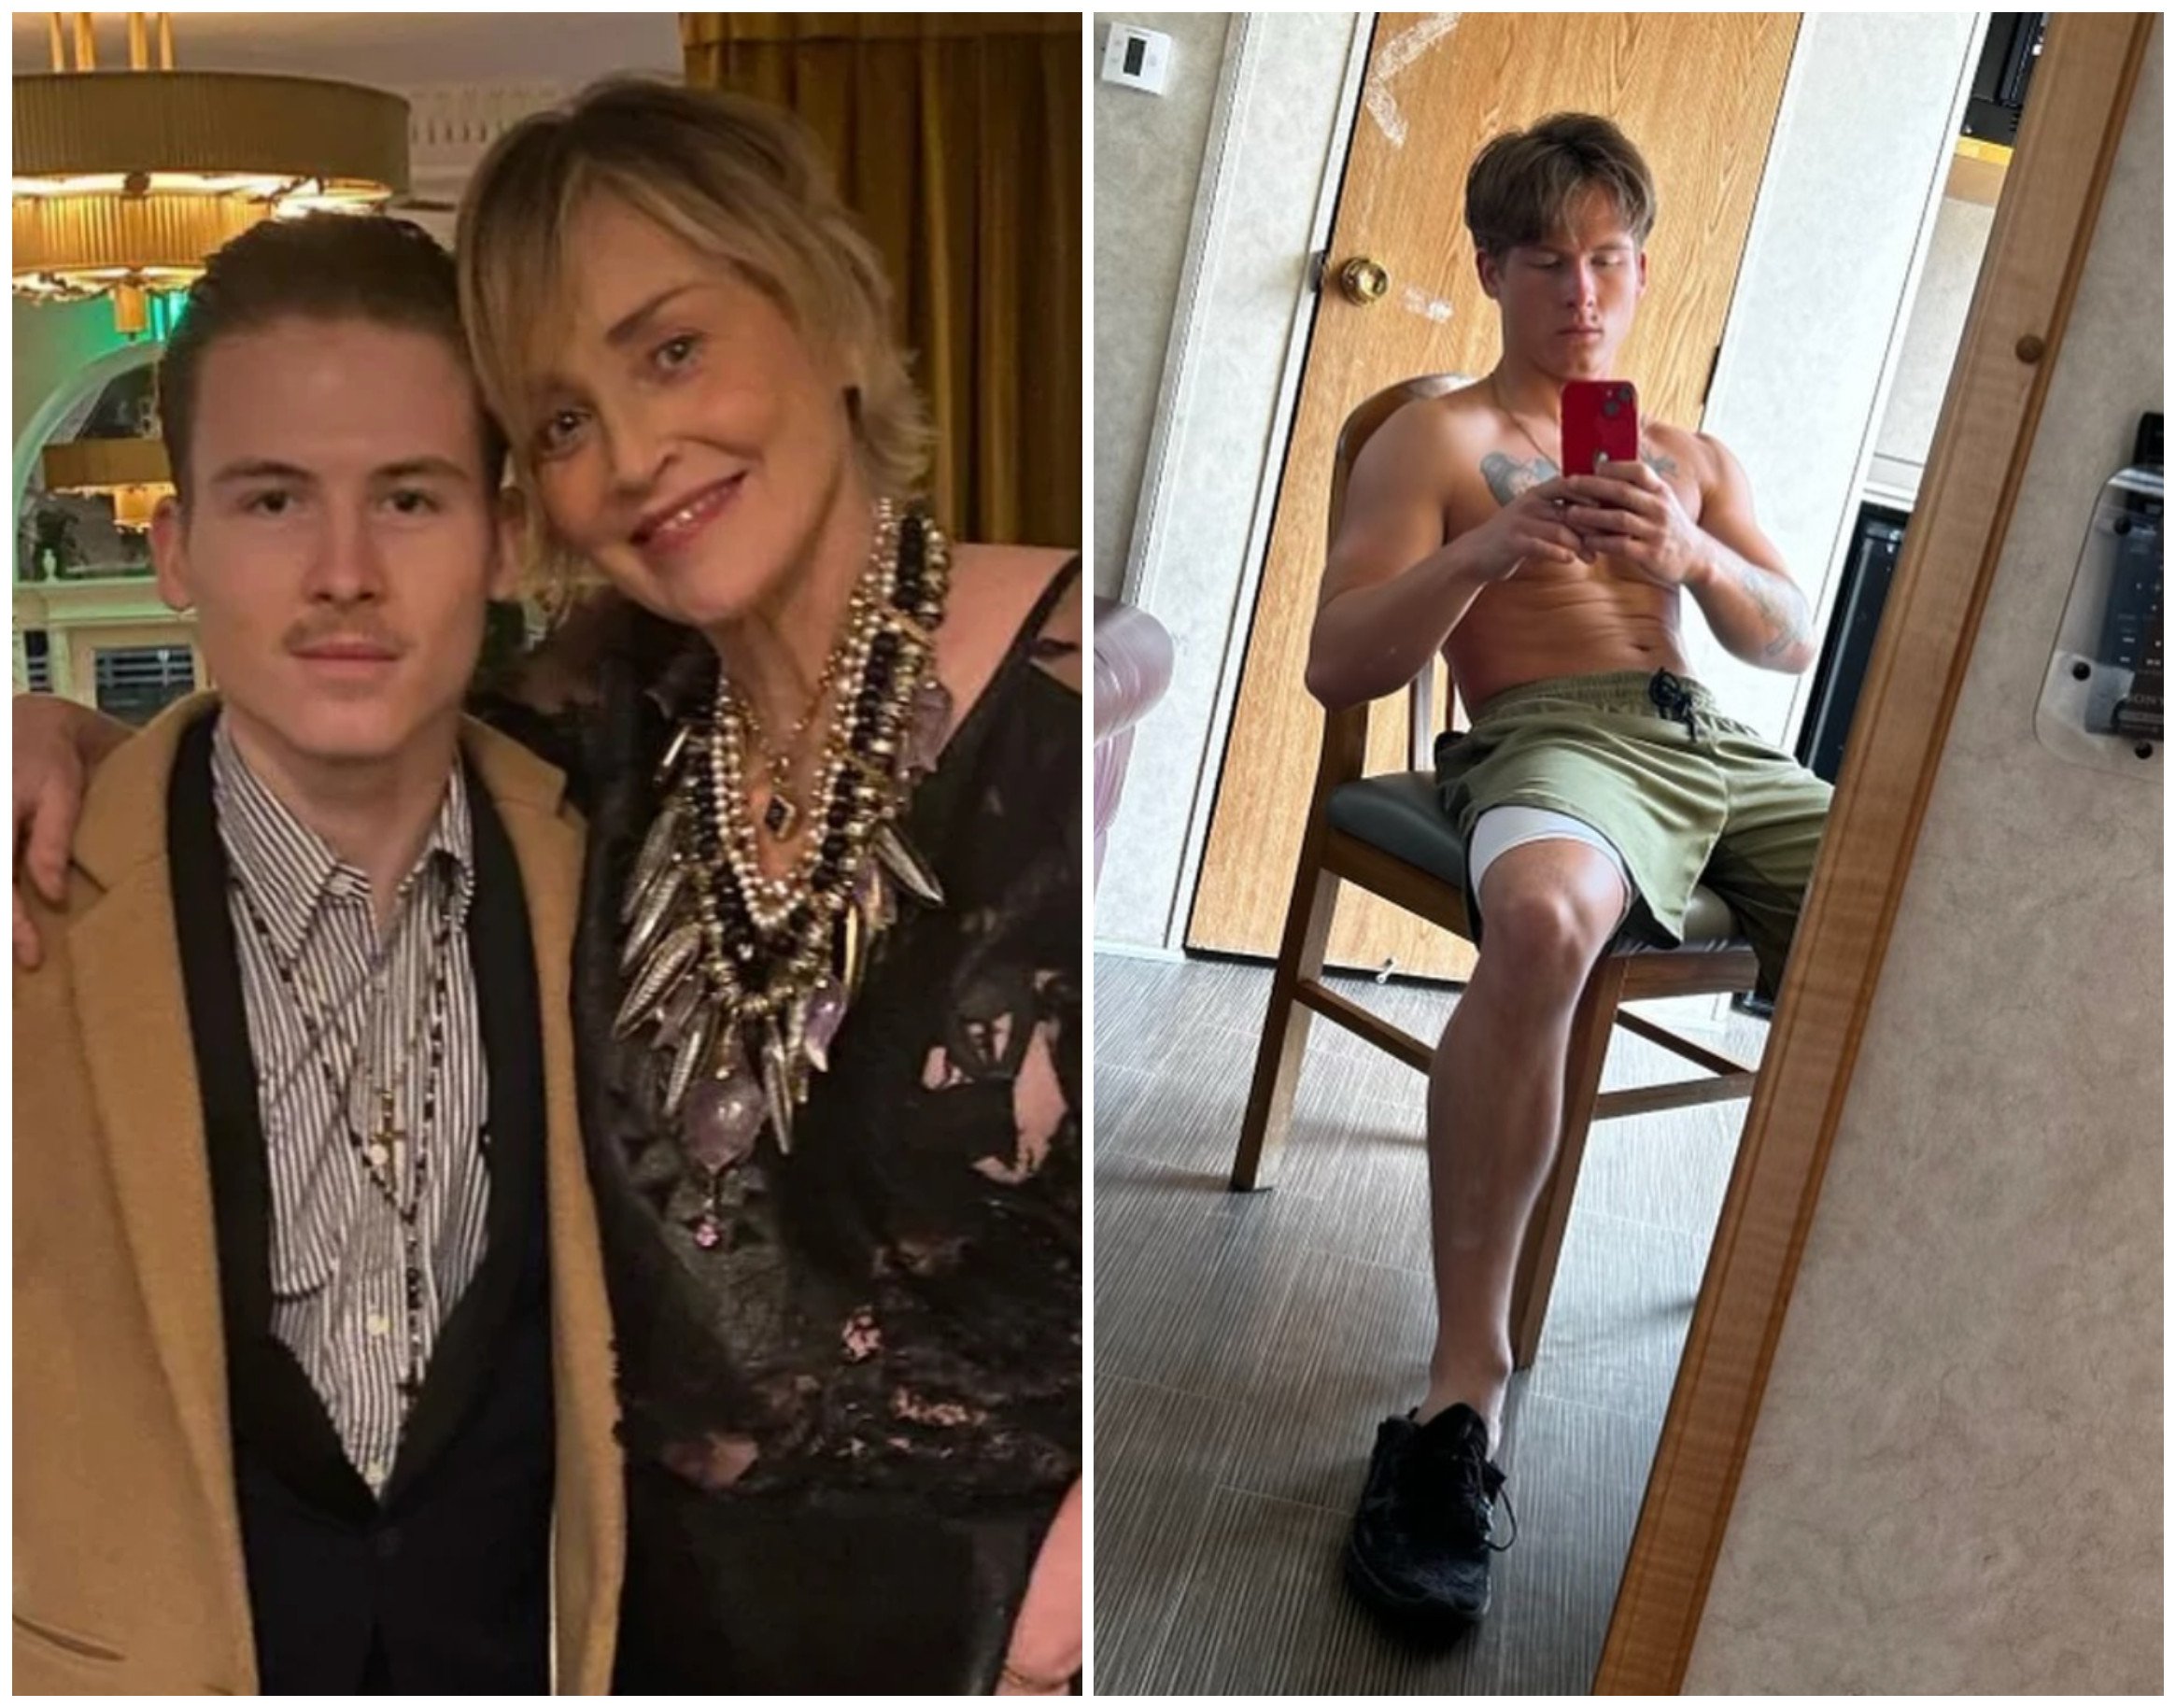 Roan Joseph Bronstein Stone is the adopted son of Hollywood actress Sharon Stone. Photos: Instagram